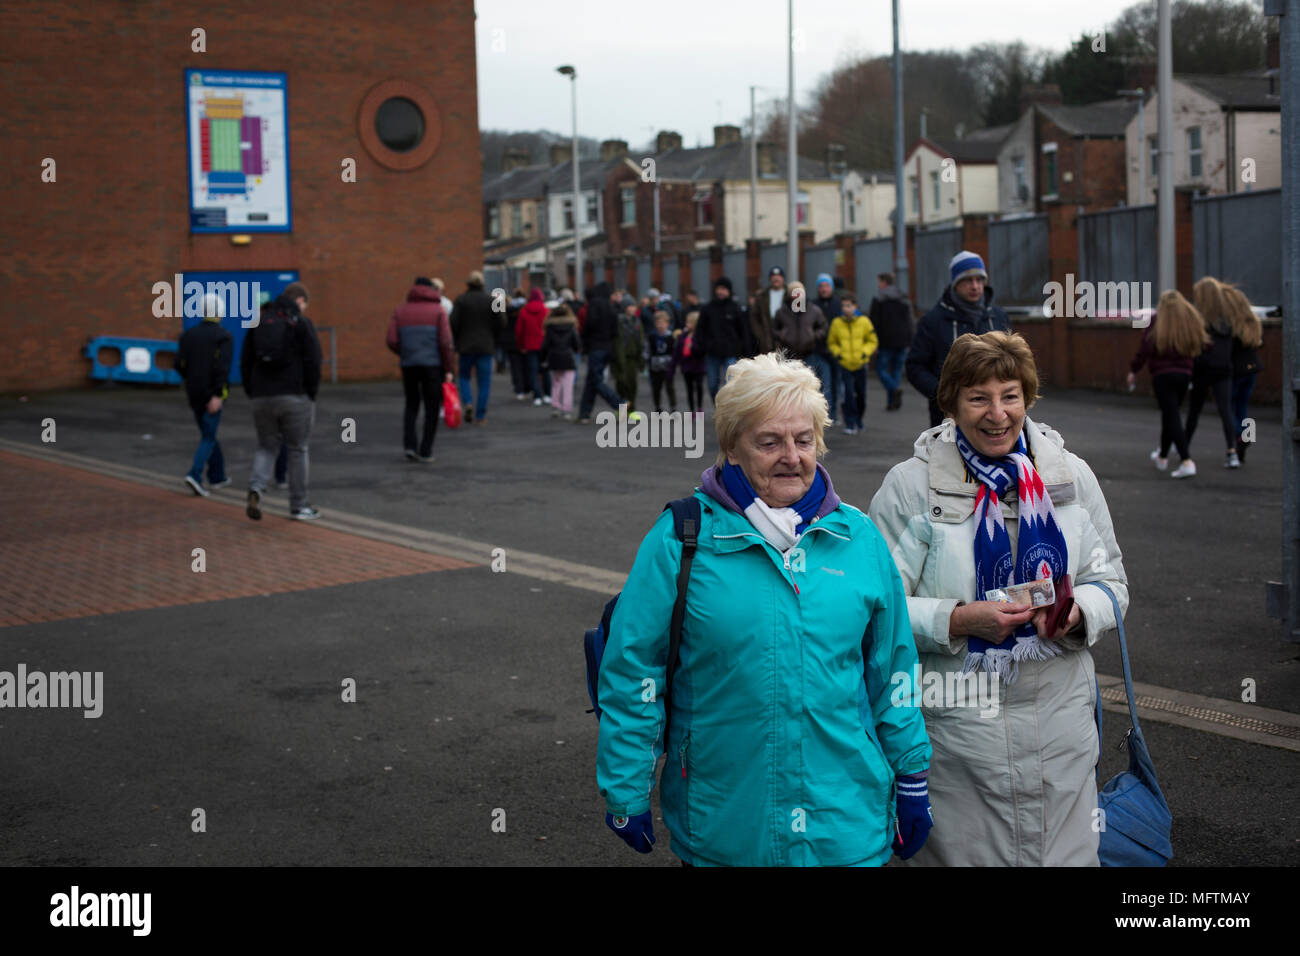 Fans walking towards the Blackburn End Stand before Blackburn Rovers played Shrewsbury Town in a Sky Bet League One fixture at Ewood Park. Both team were in the top three in the division at the start of the game. Blackburn won the match by 3 goals to 1, watched by a crowd of 13,579. Stock Photo